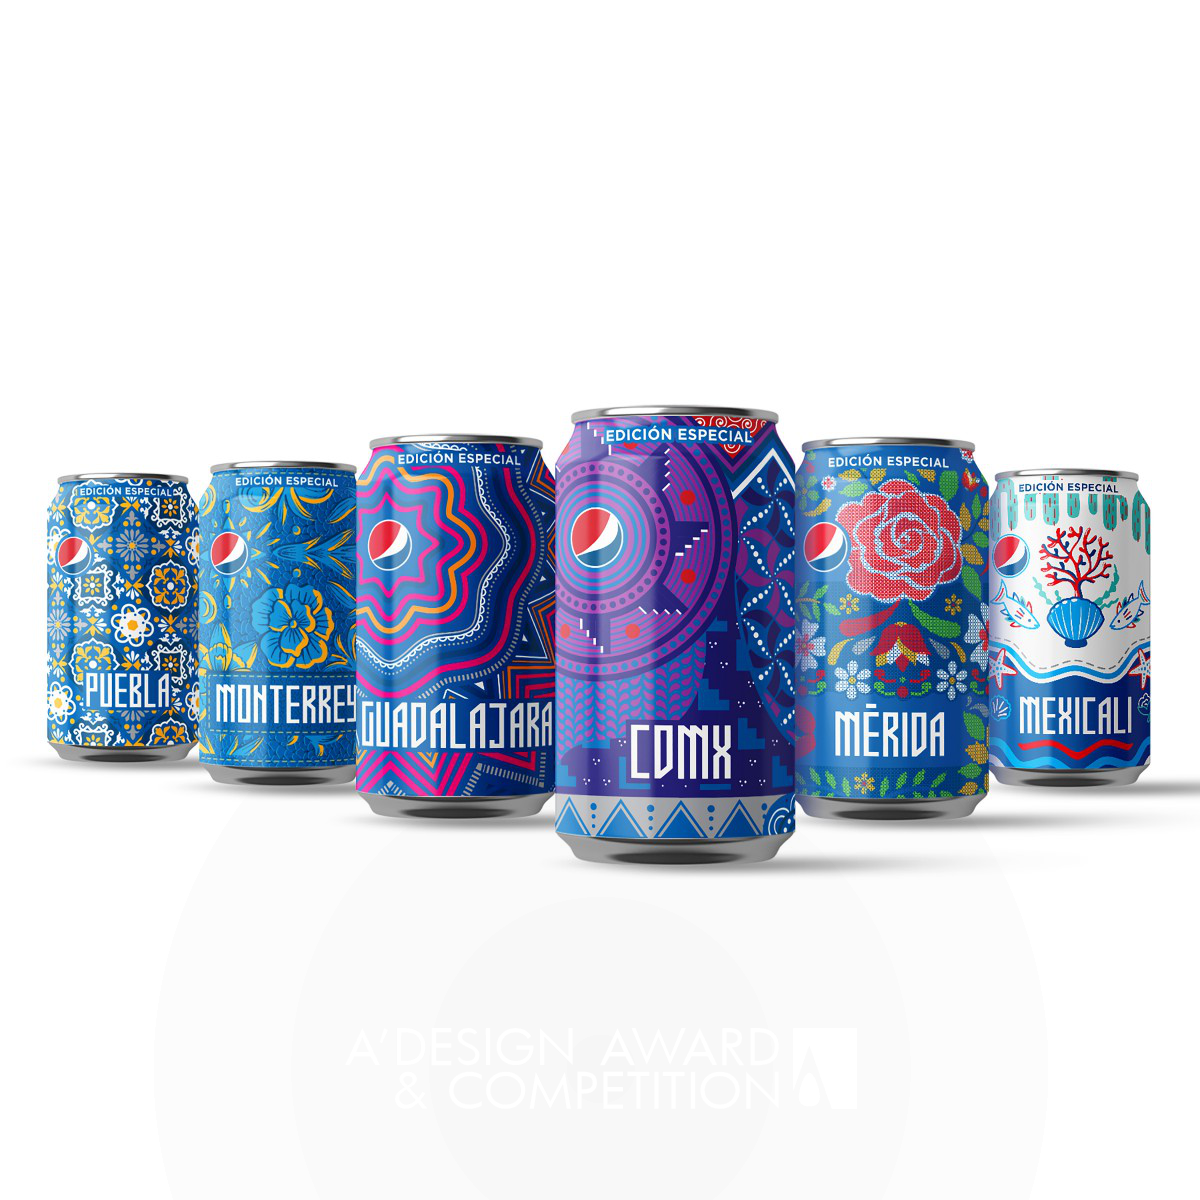 Dennis Furniss wins Golden at the prestigious A' Packaging Design Award with Pepsi Culture Limited Edition Packaging.